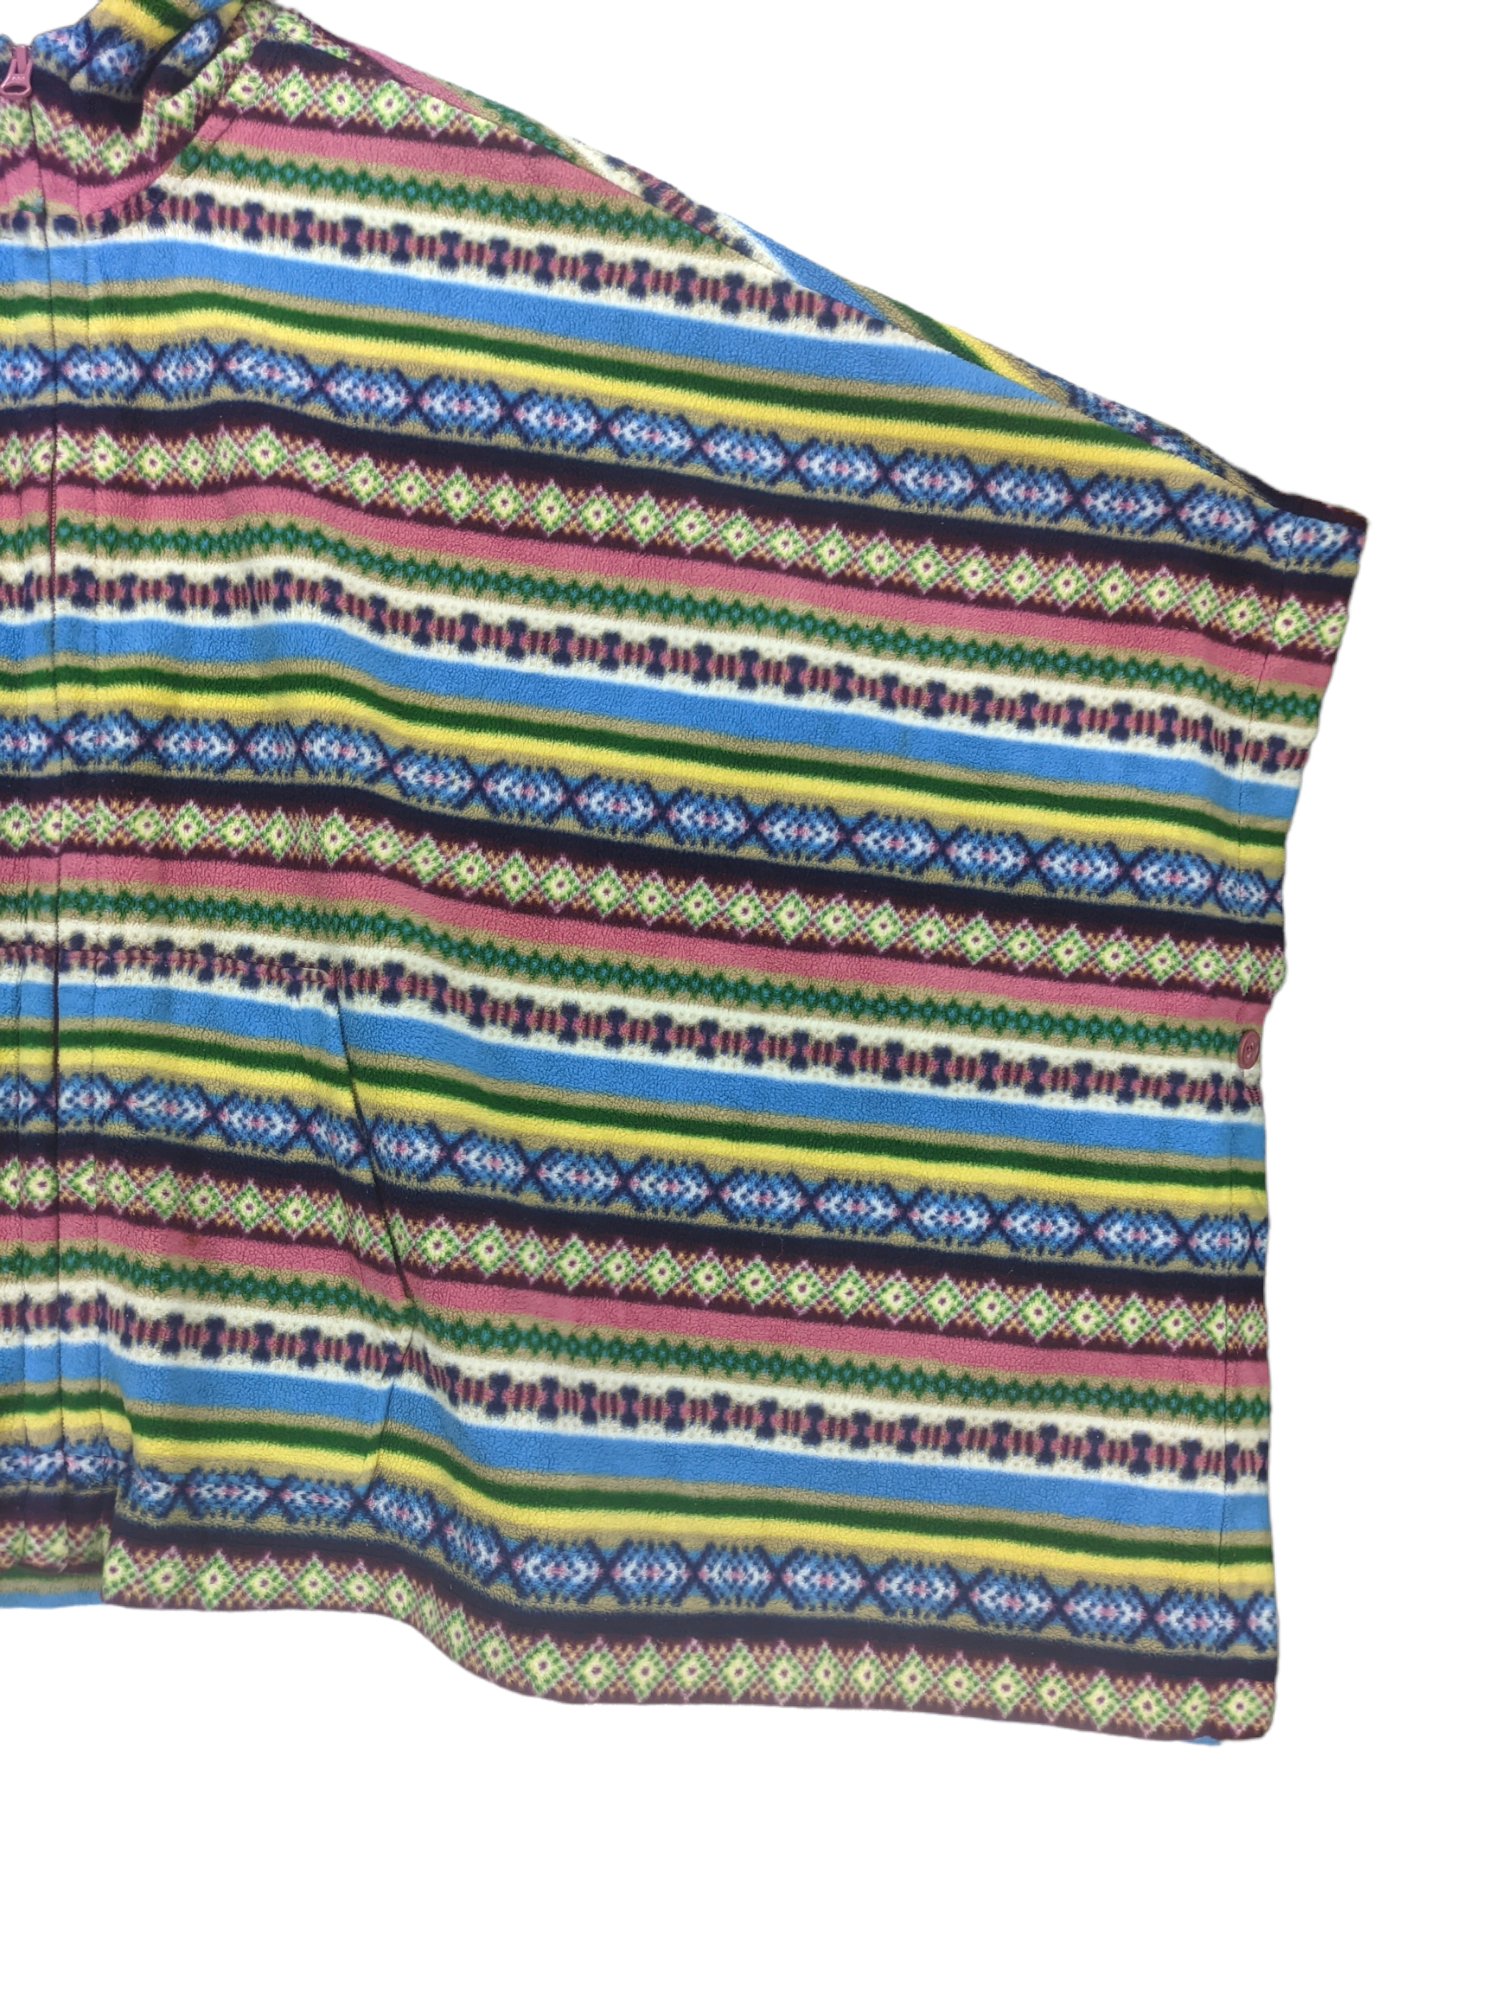 Uniqlo - Steals🔥Uniqlo Poncho Hooded Navajo Patterned - 6